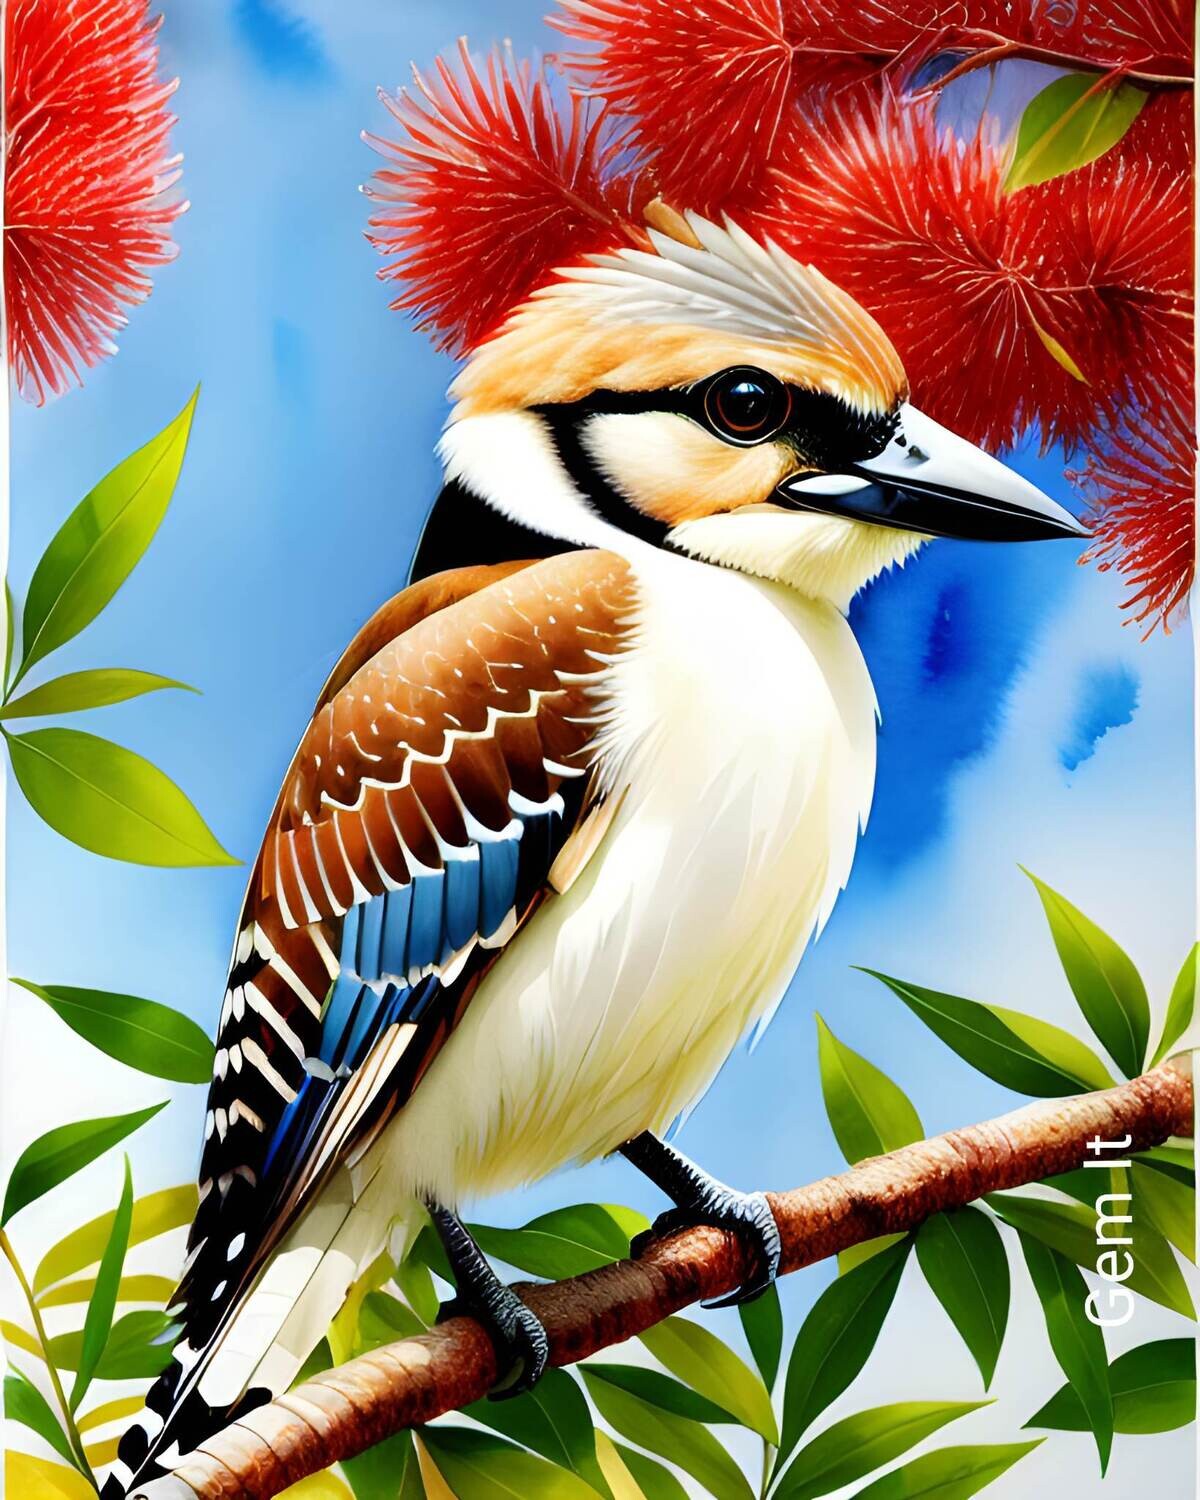 Kookaburra - Specially ordered for you. Delivery is approximately 4 - 6 weeks.